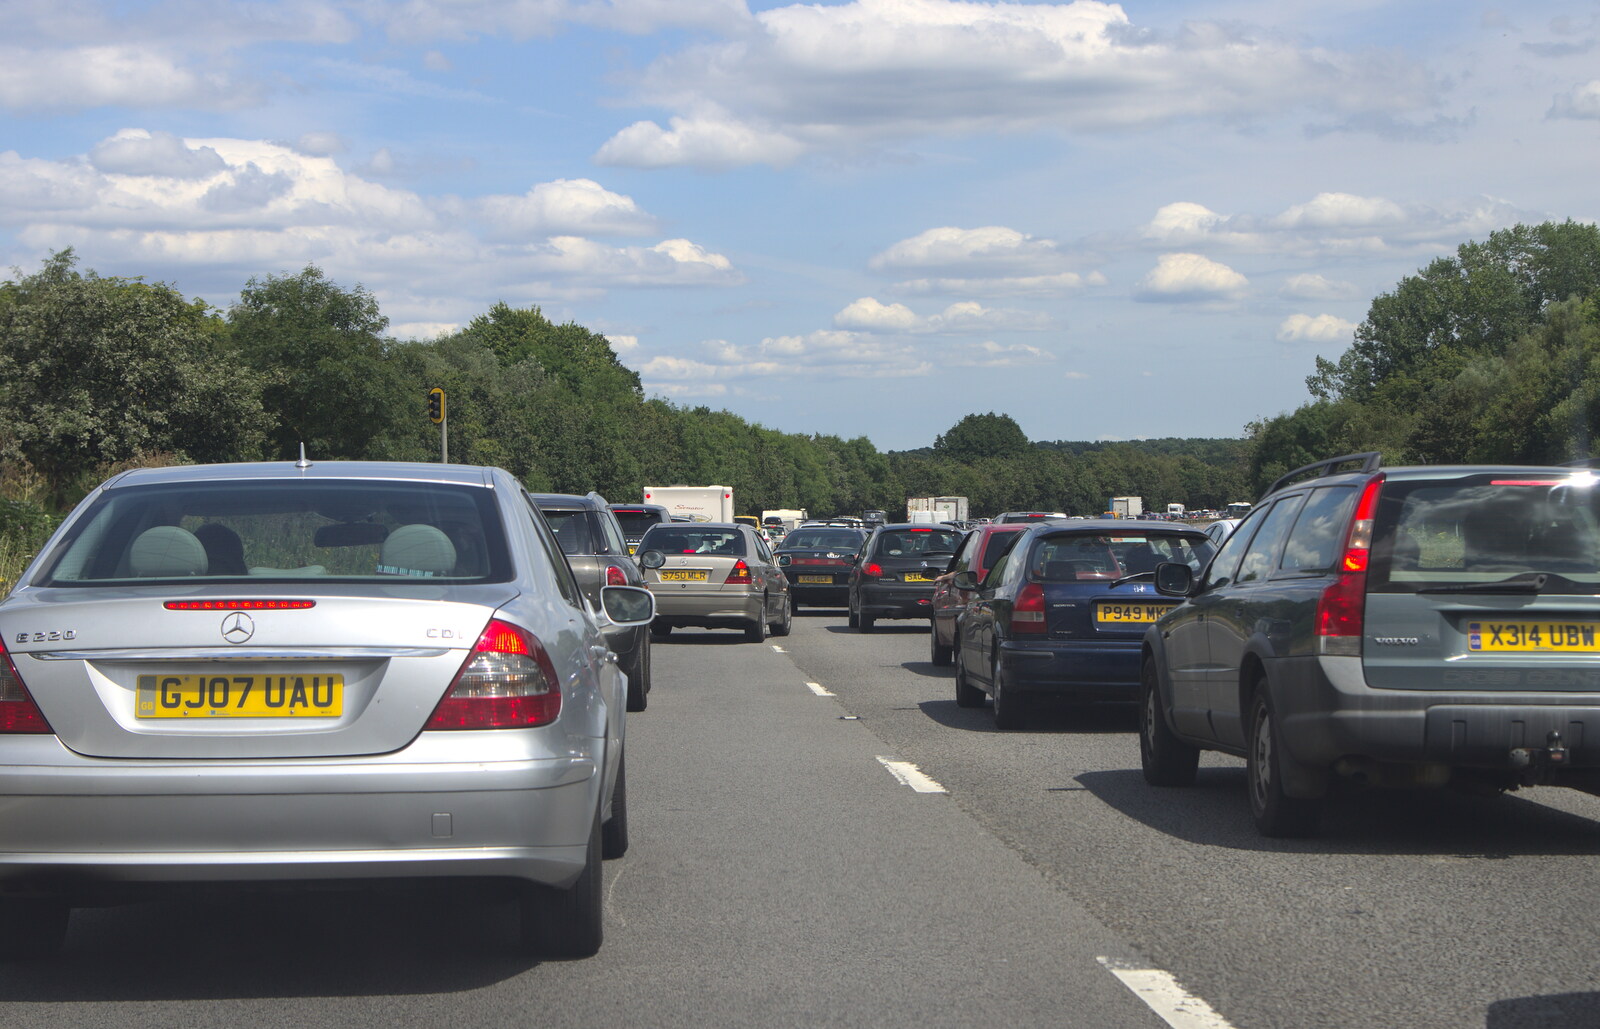 A return to a major theme of the trip: traffic jams from Bob and Bernice's 50th Wedding Anniversary, Hinton Admiral, Dorset - 25th July 2014